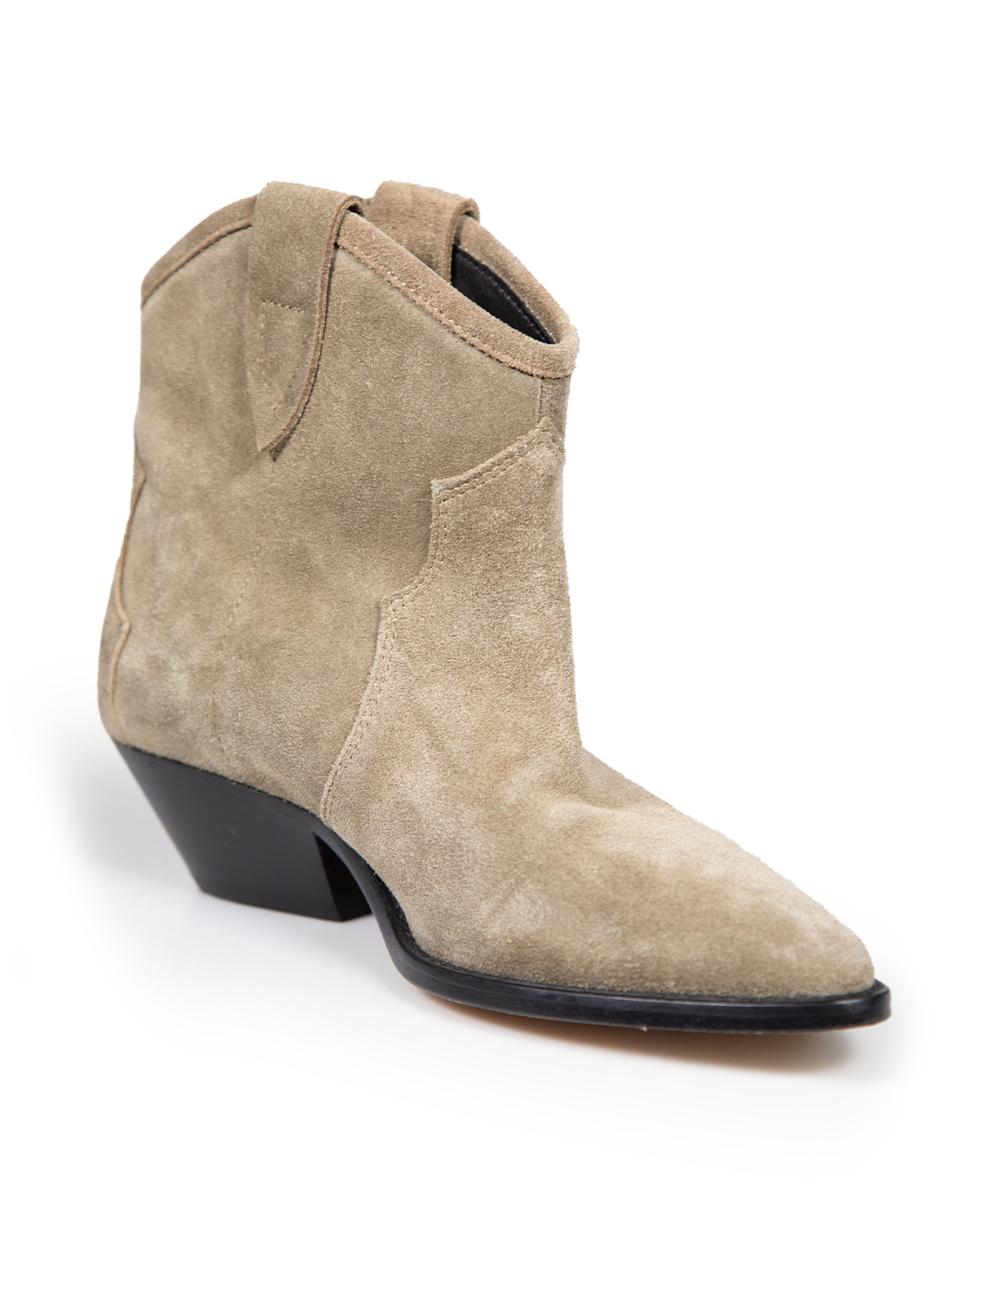 CONDITION is Very good. Minimal wear to boots is evident. Minimal discolouration to the front and sides of both shoes. Small scratches to the front, back and sides of both shoes on this used Isabel Marant designer resale item.
 
 
 
 Details
 
 
